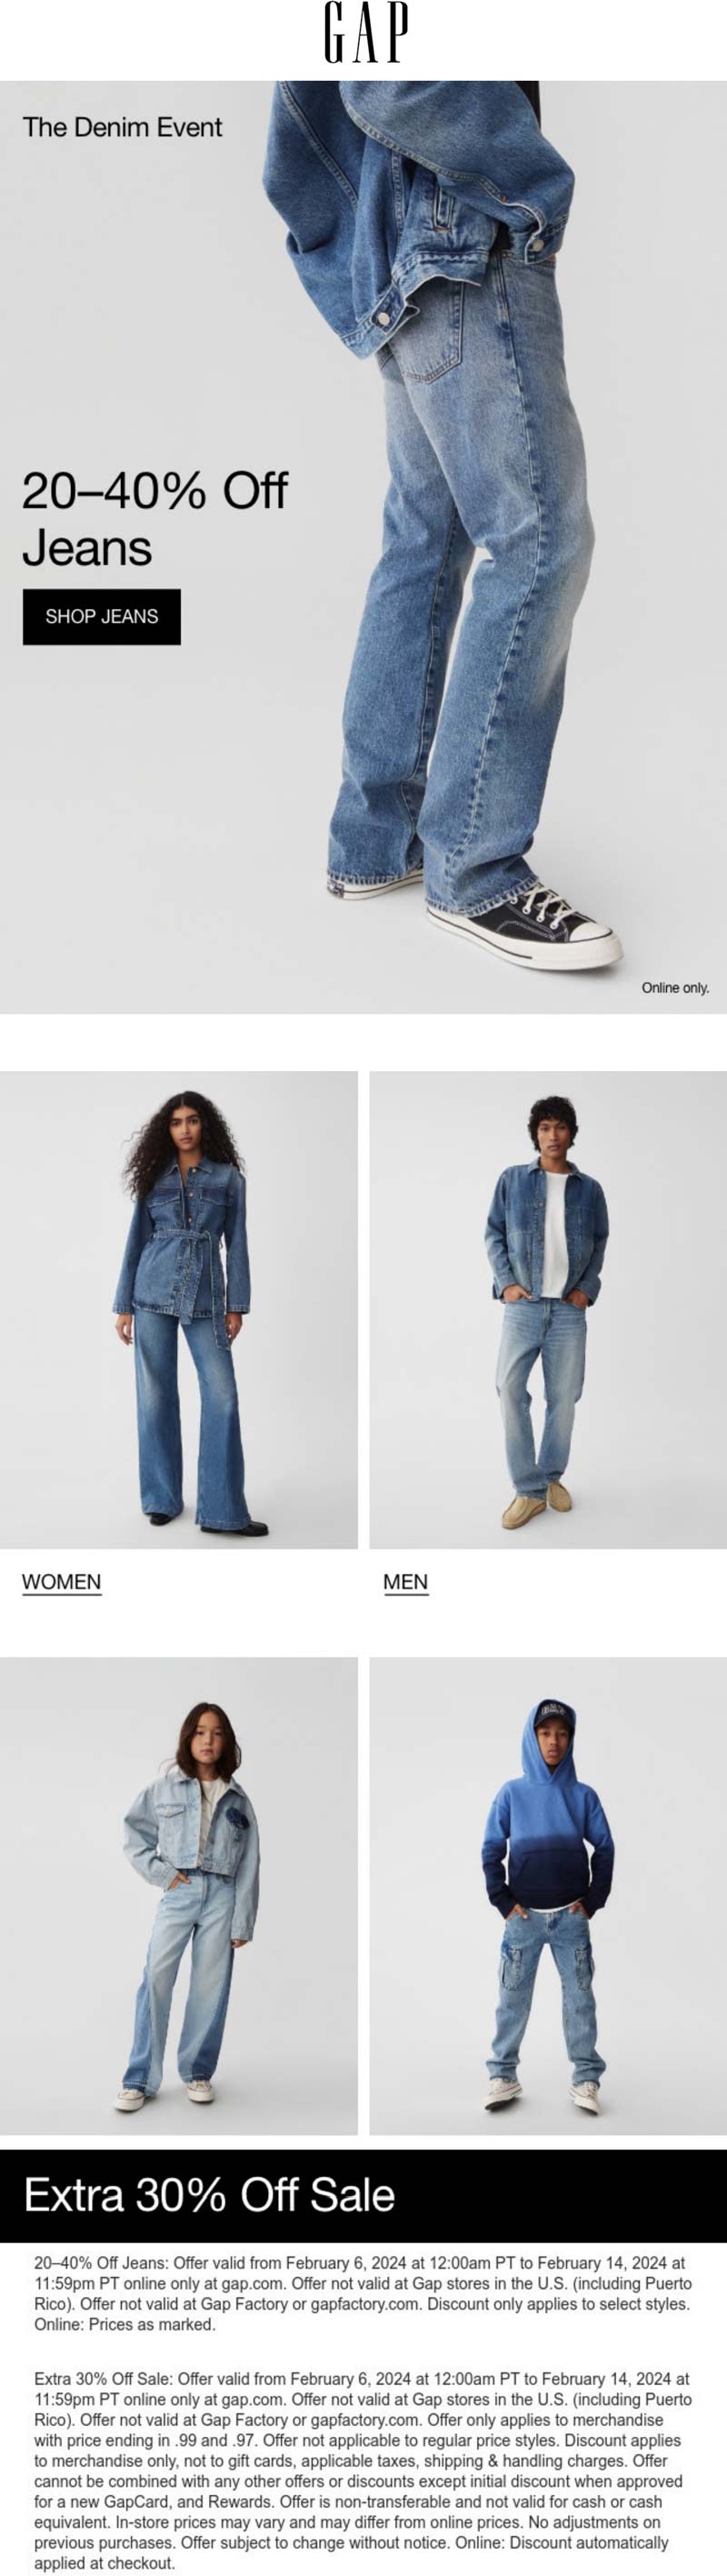 Gap stores Coupon  Extra 30% off sale items & 20-40% off jeans online at Gap #gap 